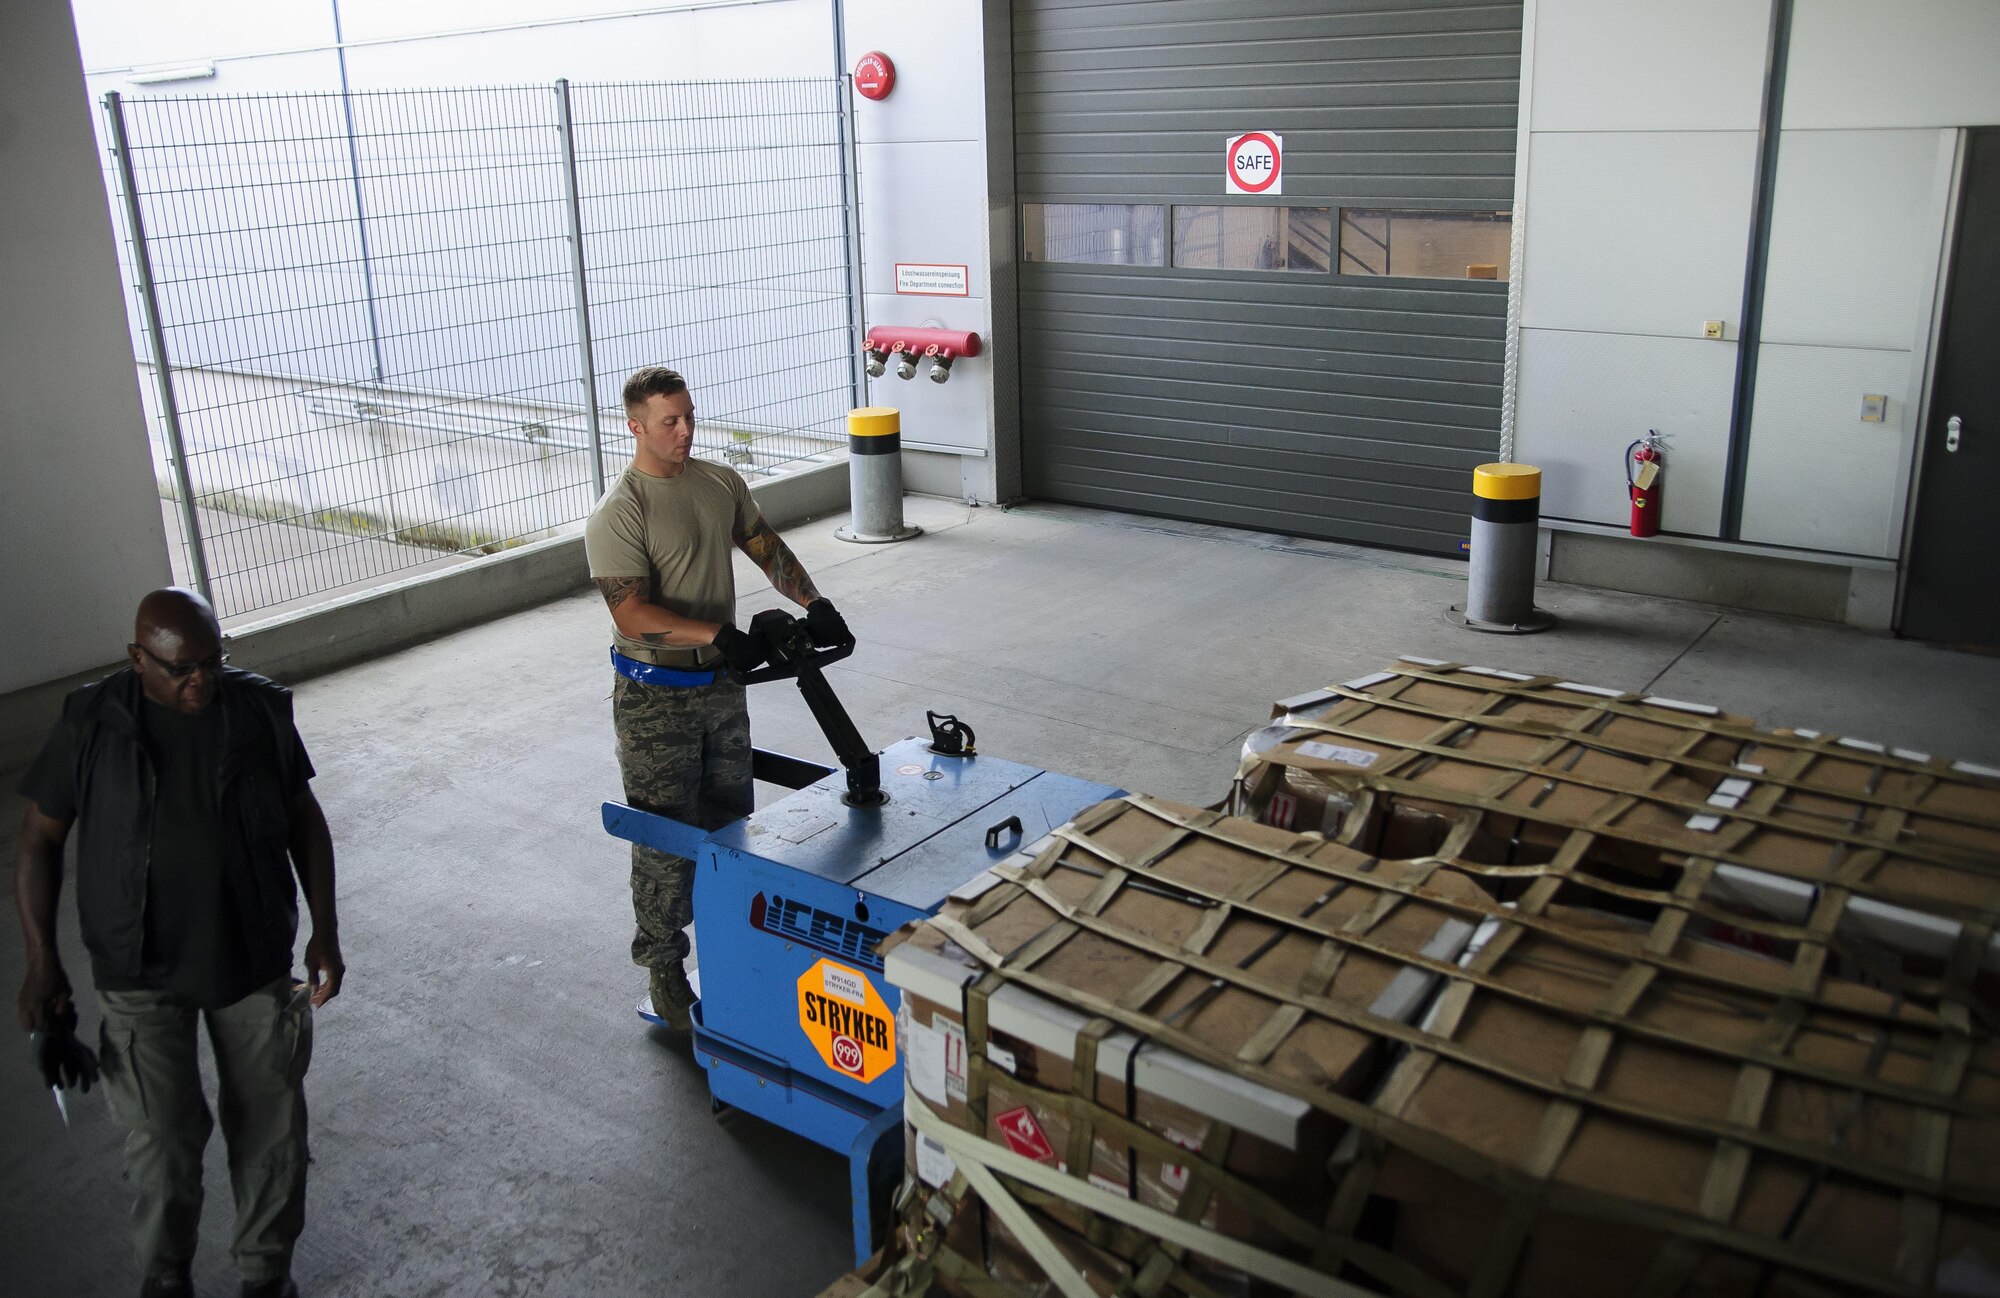 Tech. Sgt. William Anderson, an Airman from the 81st Aerial Port Squadron, Joint Base Charleston, conducts off-station annual training in the special handling section at Ramstein Air Base, Germany, July 19, 2017. Anderson’s use of this ICEM pallet mover, nicknamed “Blue Goose,” allows him to move large pallets of cargo with ease.  (U.S. Air Force photo by Senior Airman Jonathan Lane)